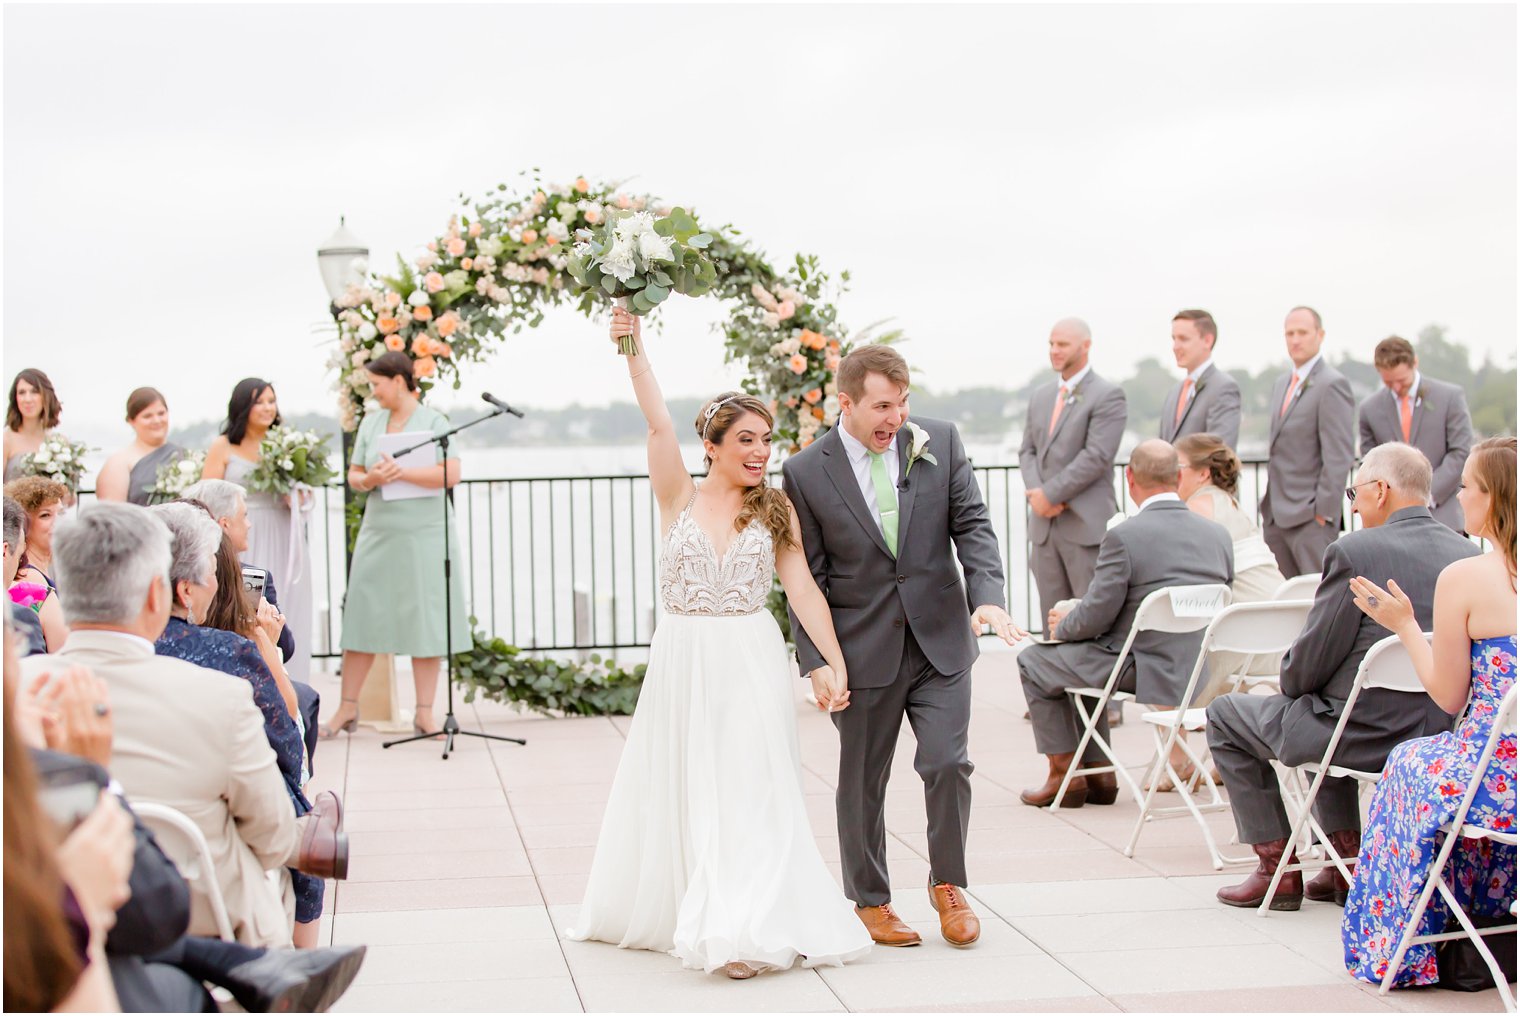 Excited bride and groom at wedding ceremony recessional 